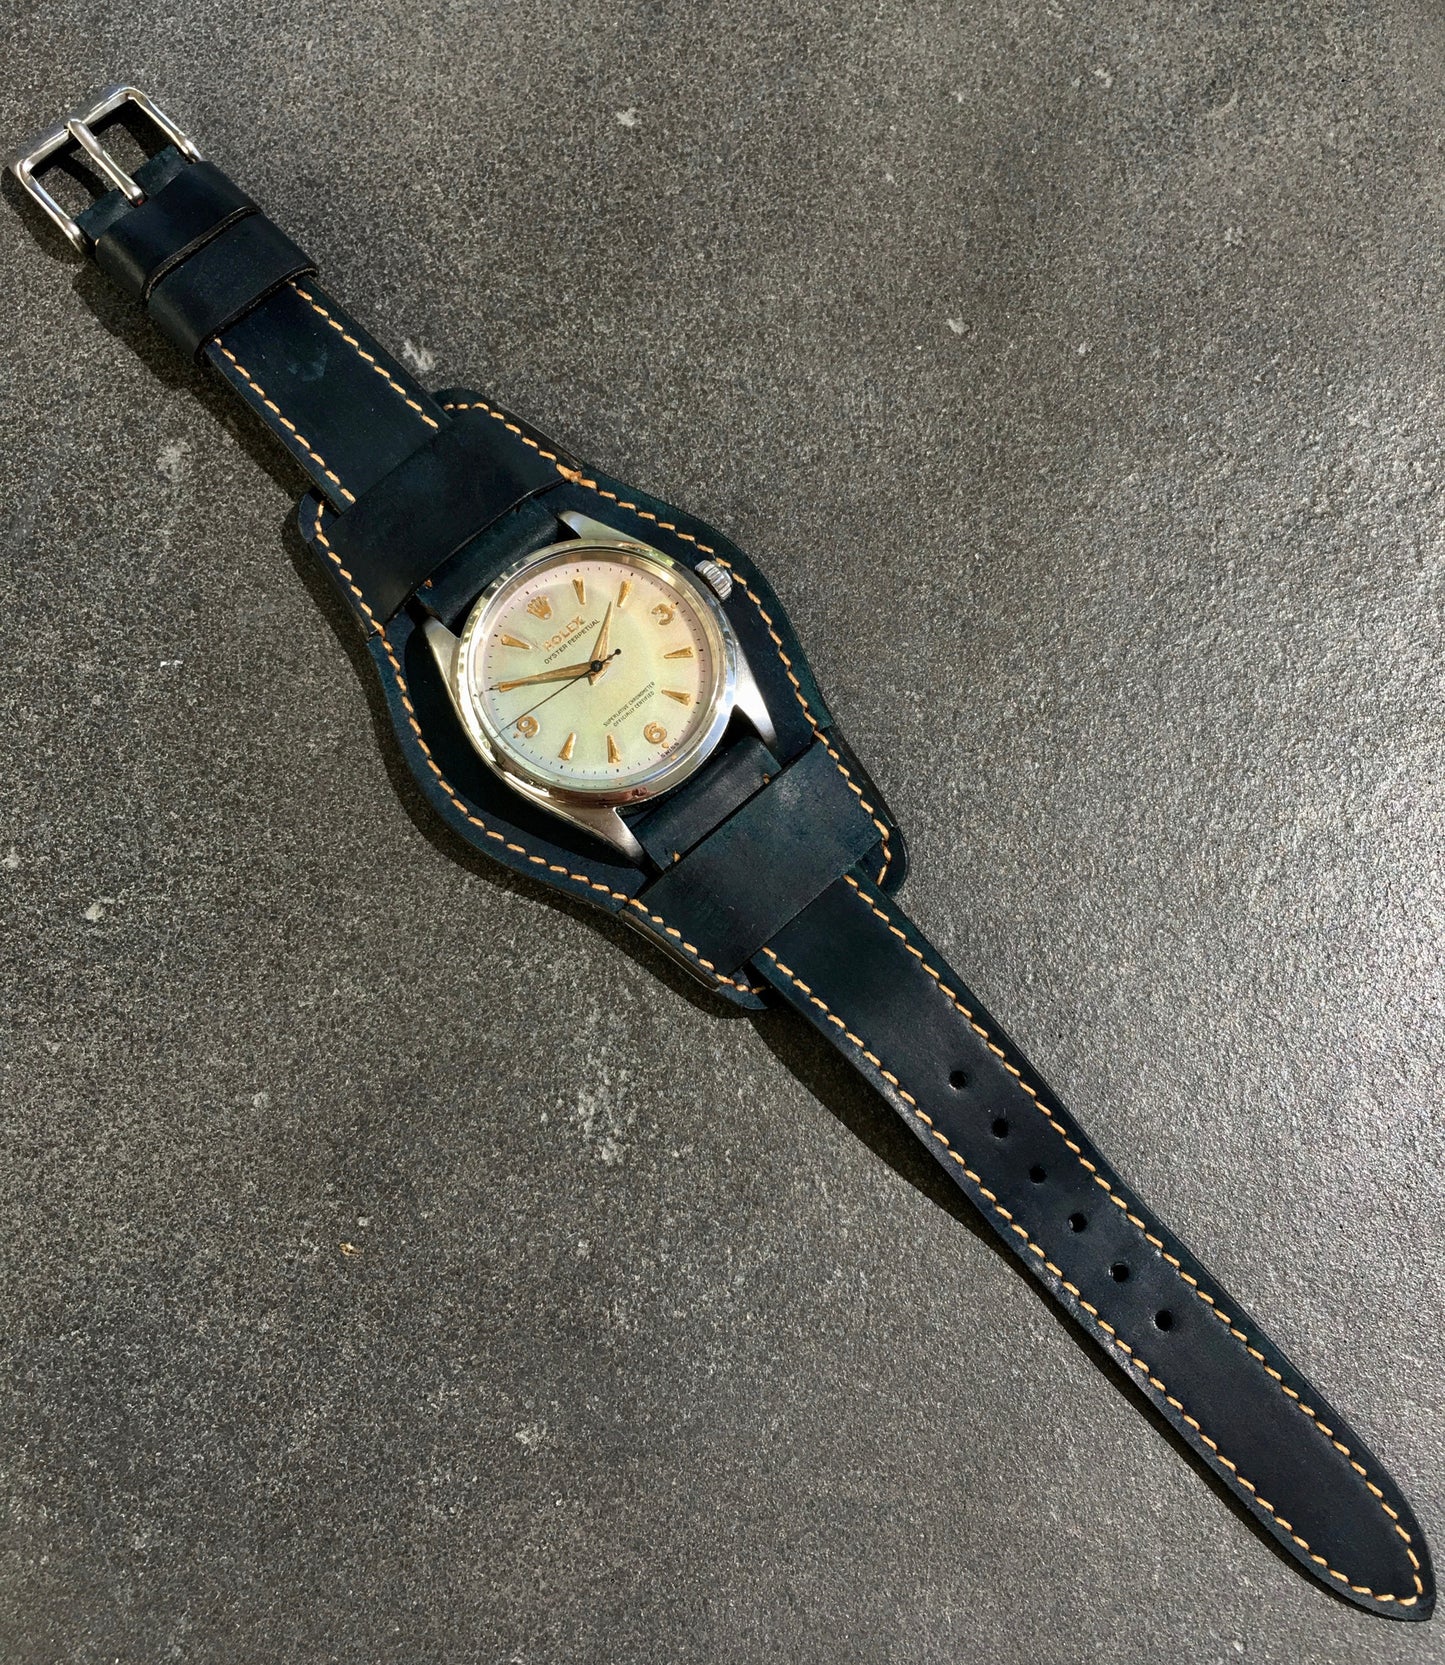 Vintage Rolex Oyster Perpetual 1002 RARE Iridescent Stainless Steel 1960 Wristwatch - Hashtag Watch Company